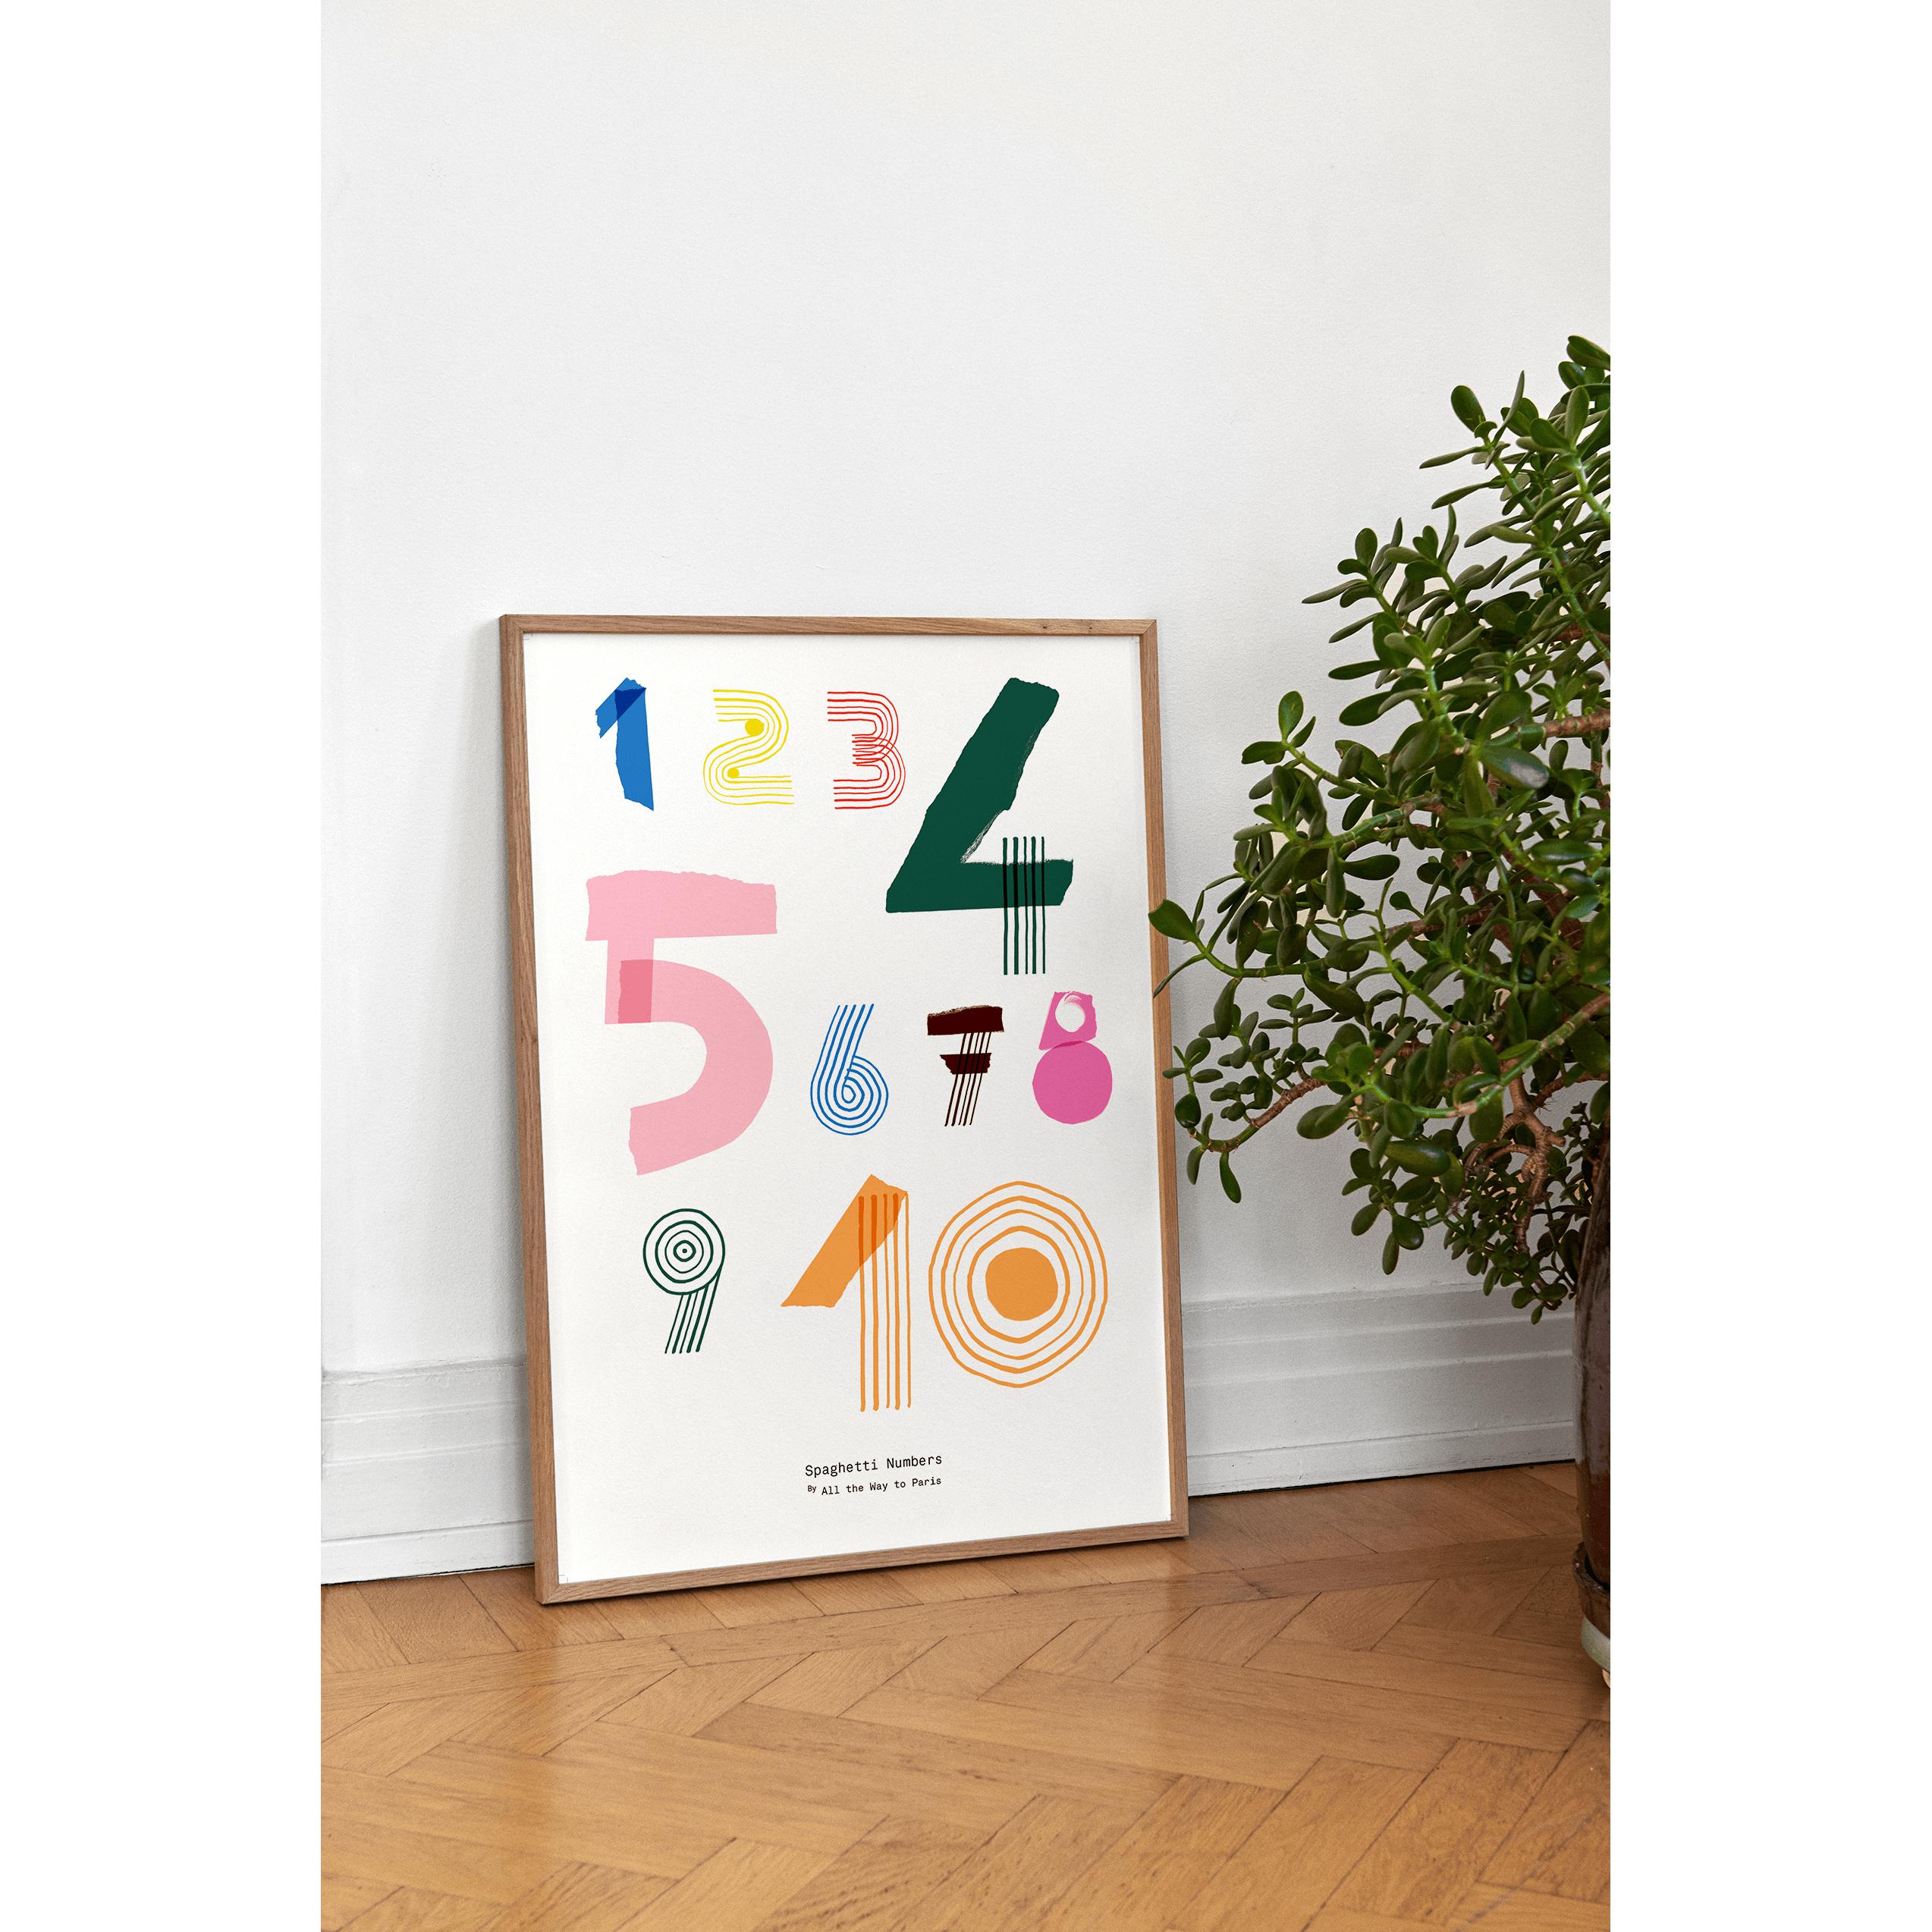 Paper Collective Spaghetti Numbers Poster, 50x70 cm